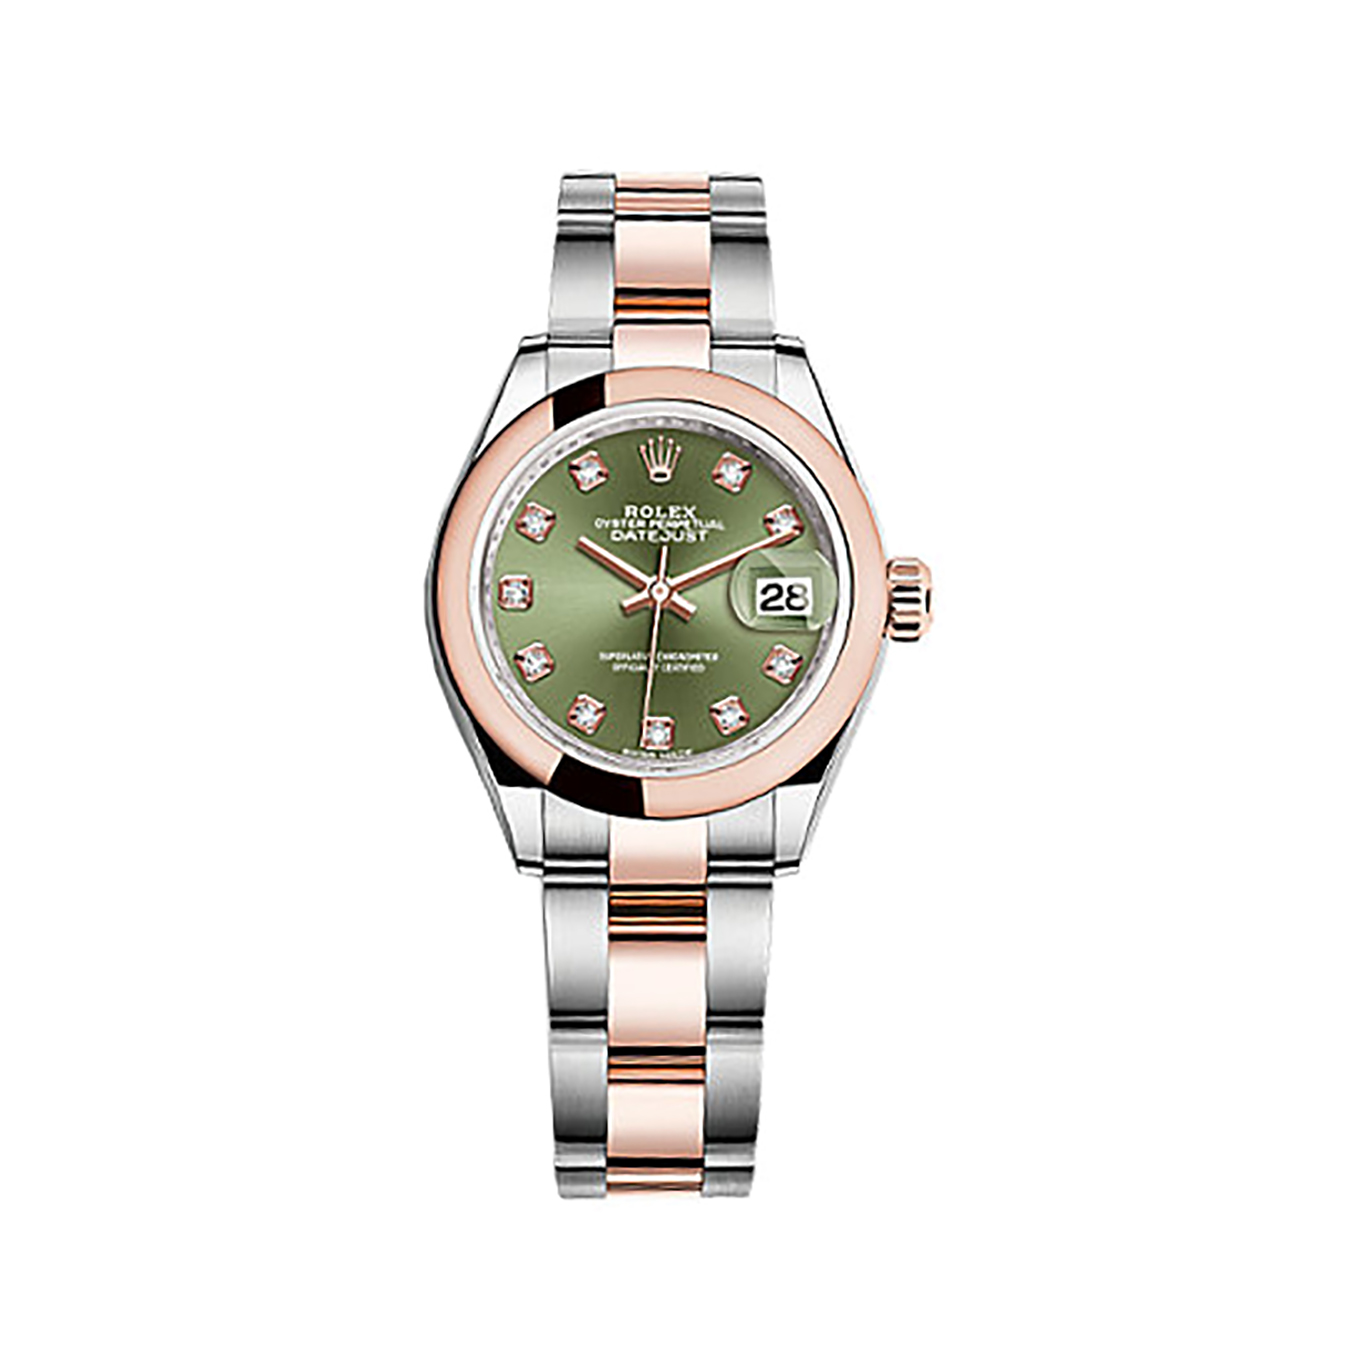 Lady-Datejust 28 279161 Rose Gold & Stainless Steel Watch (Olive Green Set with Diamonds)